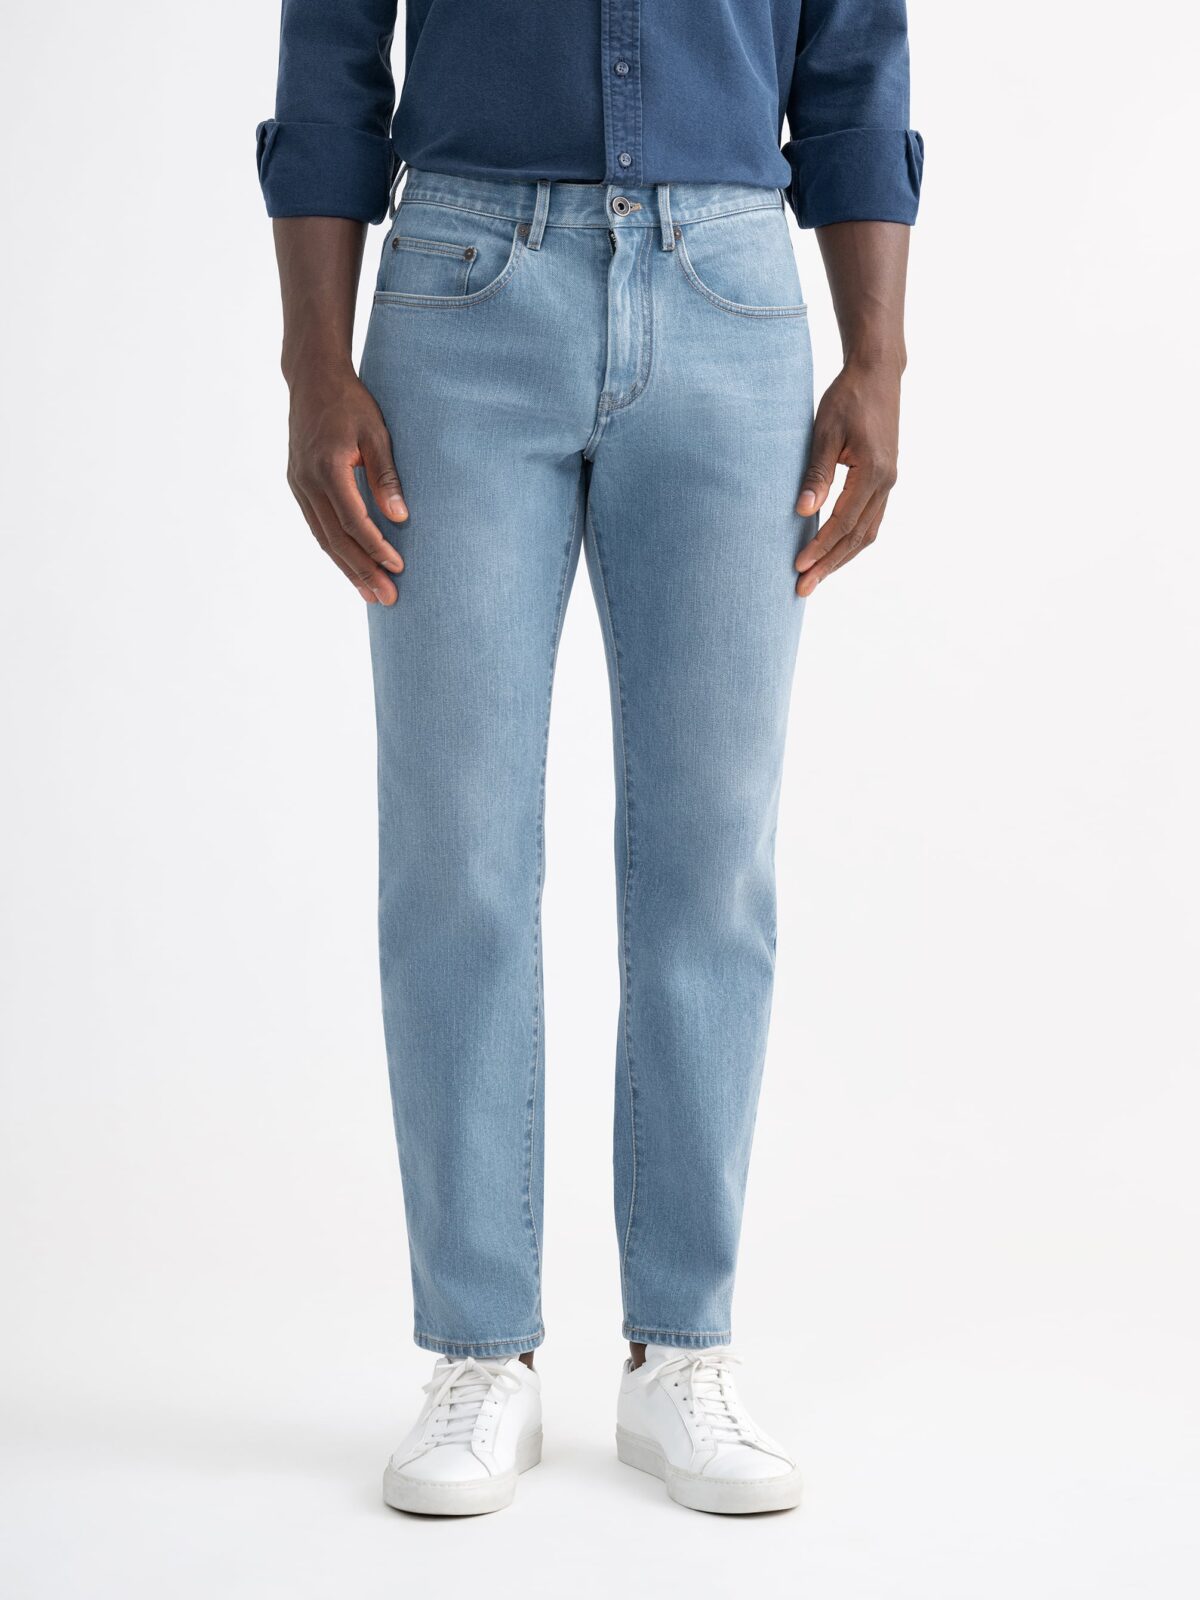 Zara - Jeans with Adjustable Interior Waistband and Front Button Closure. Front Patch Pockets. Frayed Hem. - Light Blue - Unisex